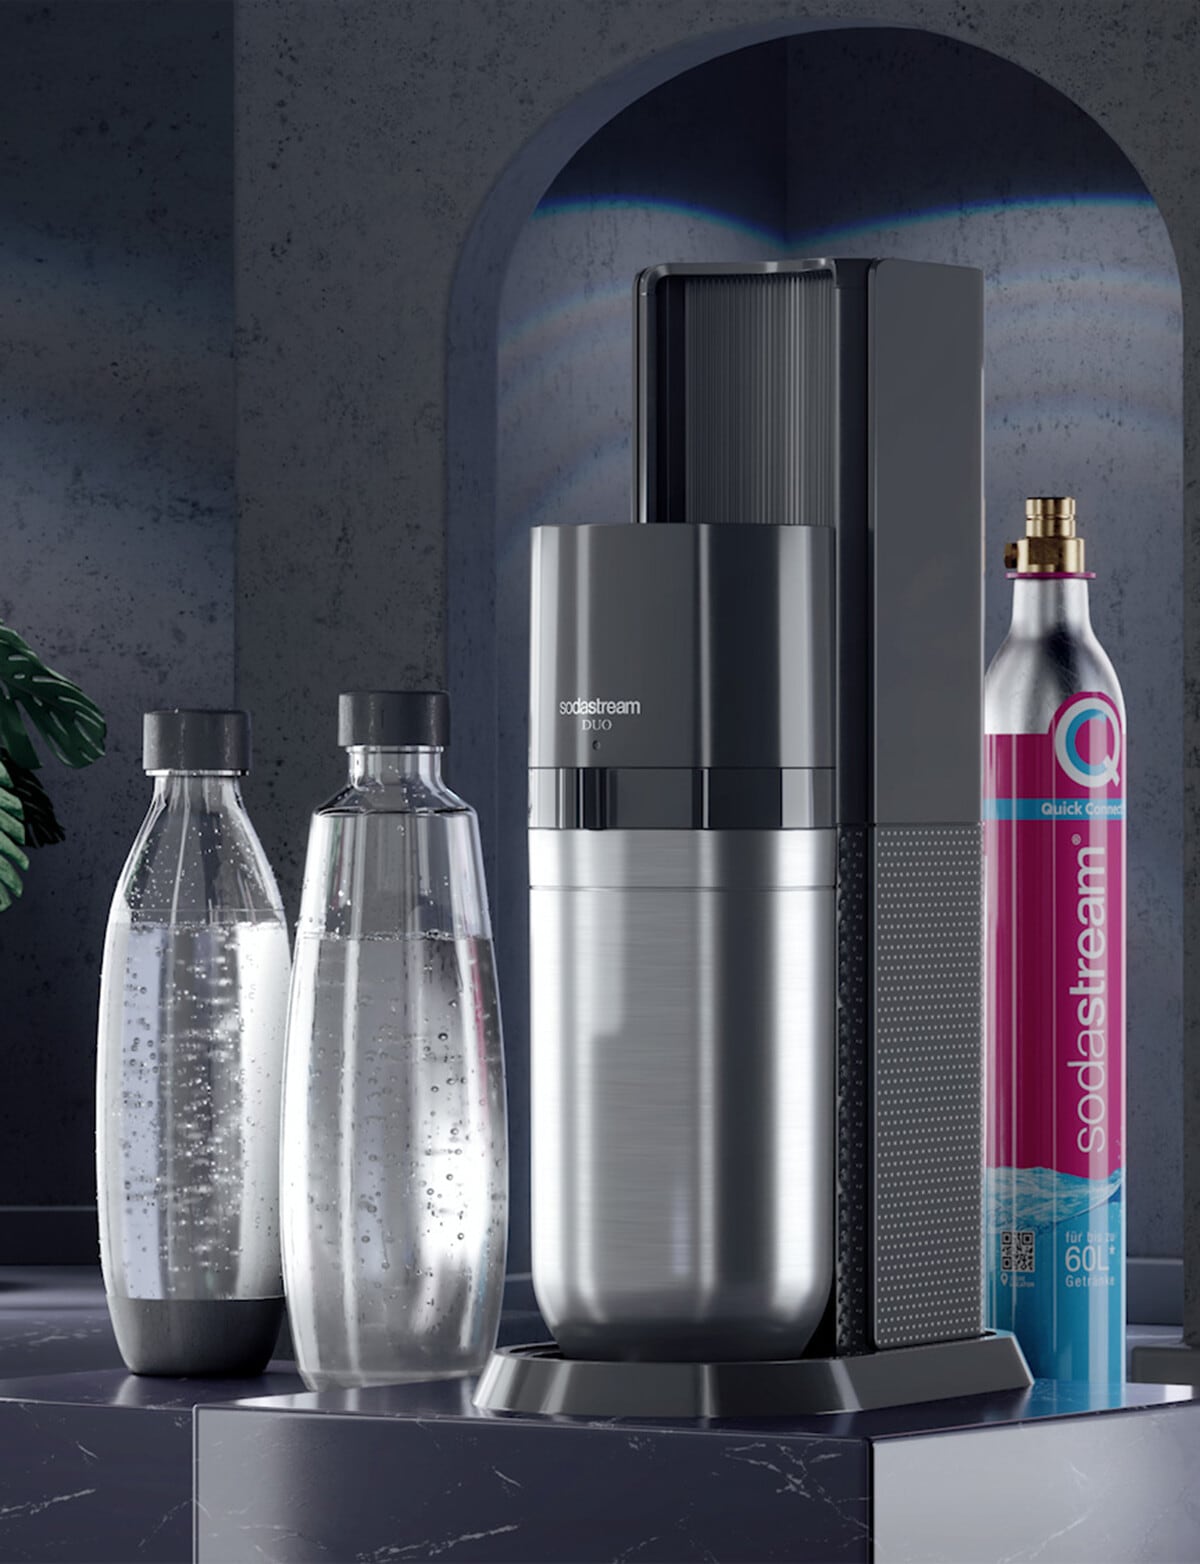 User manual SodaStream E-Duo (English - 60 pages)